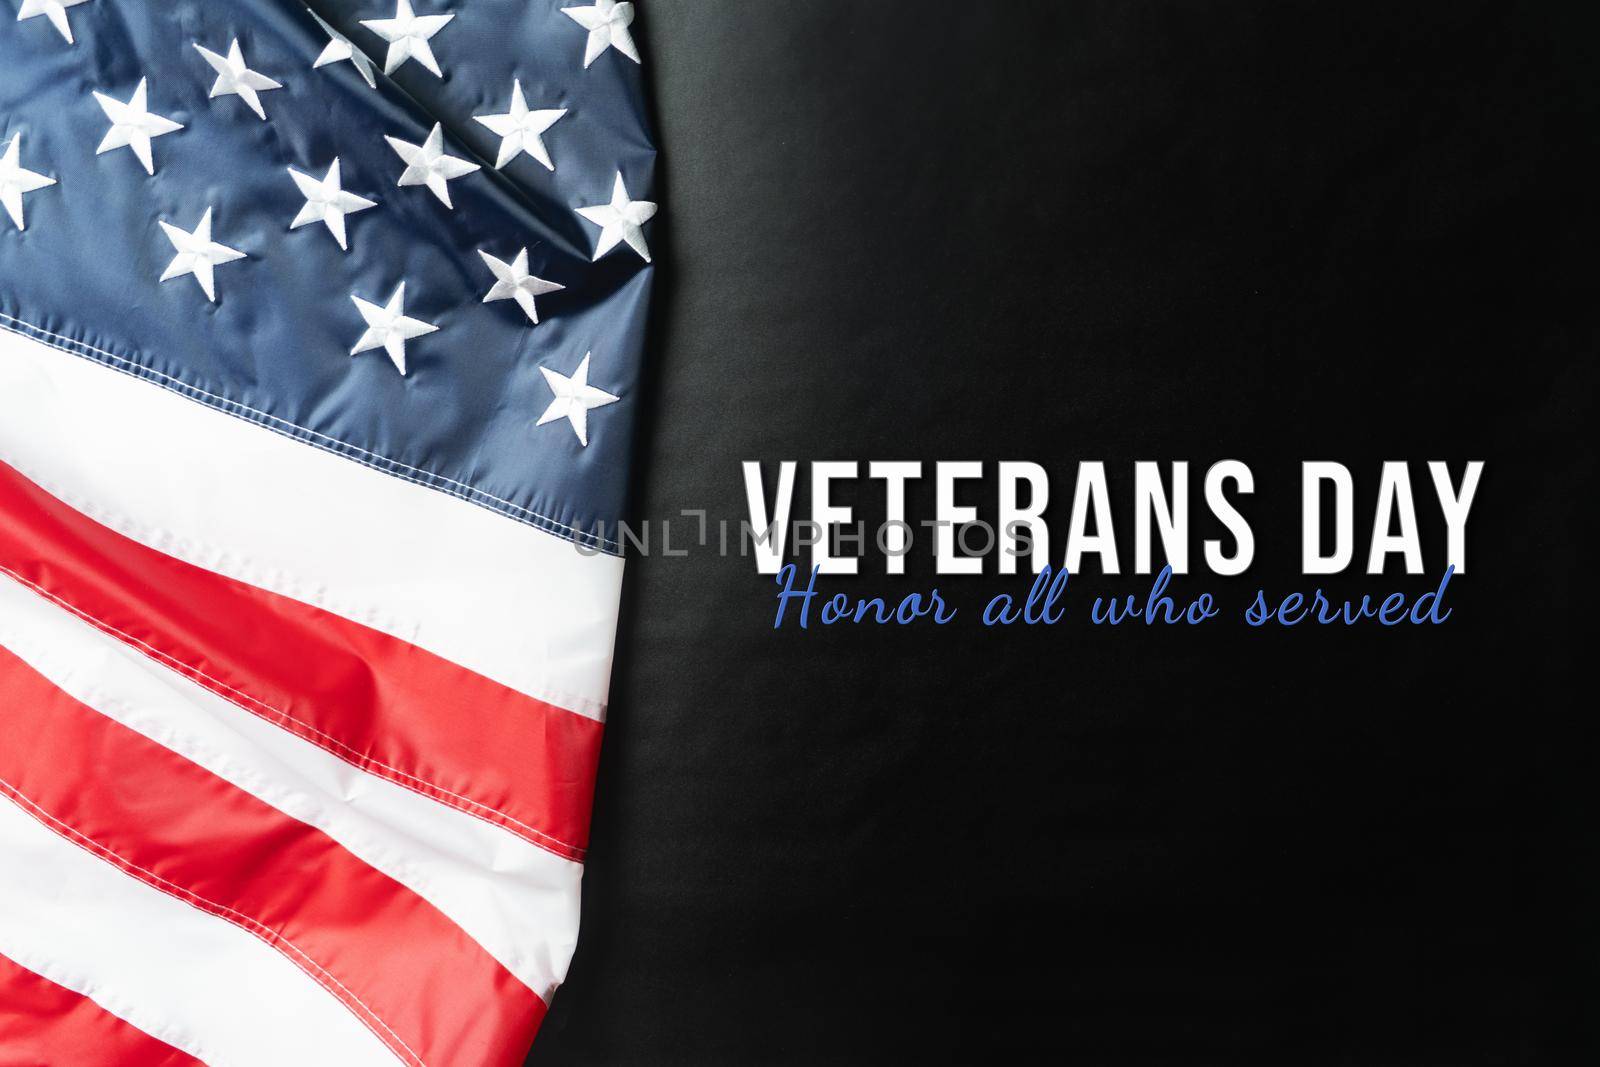 Veterans day. Honoring all who served. American flag on black background. by psodaz